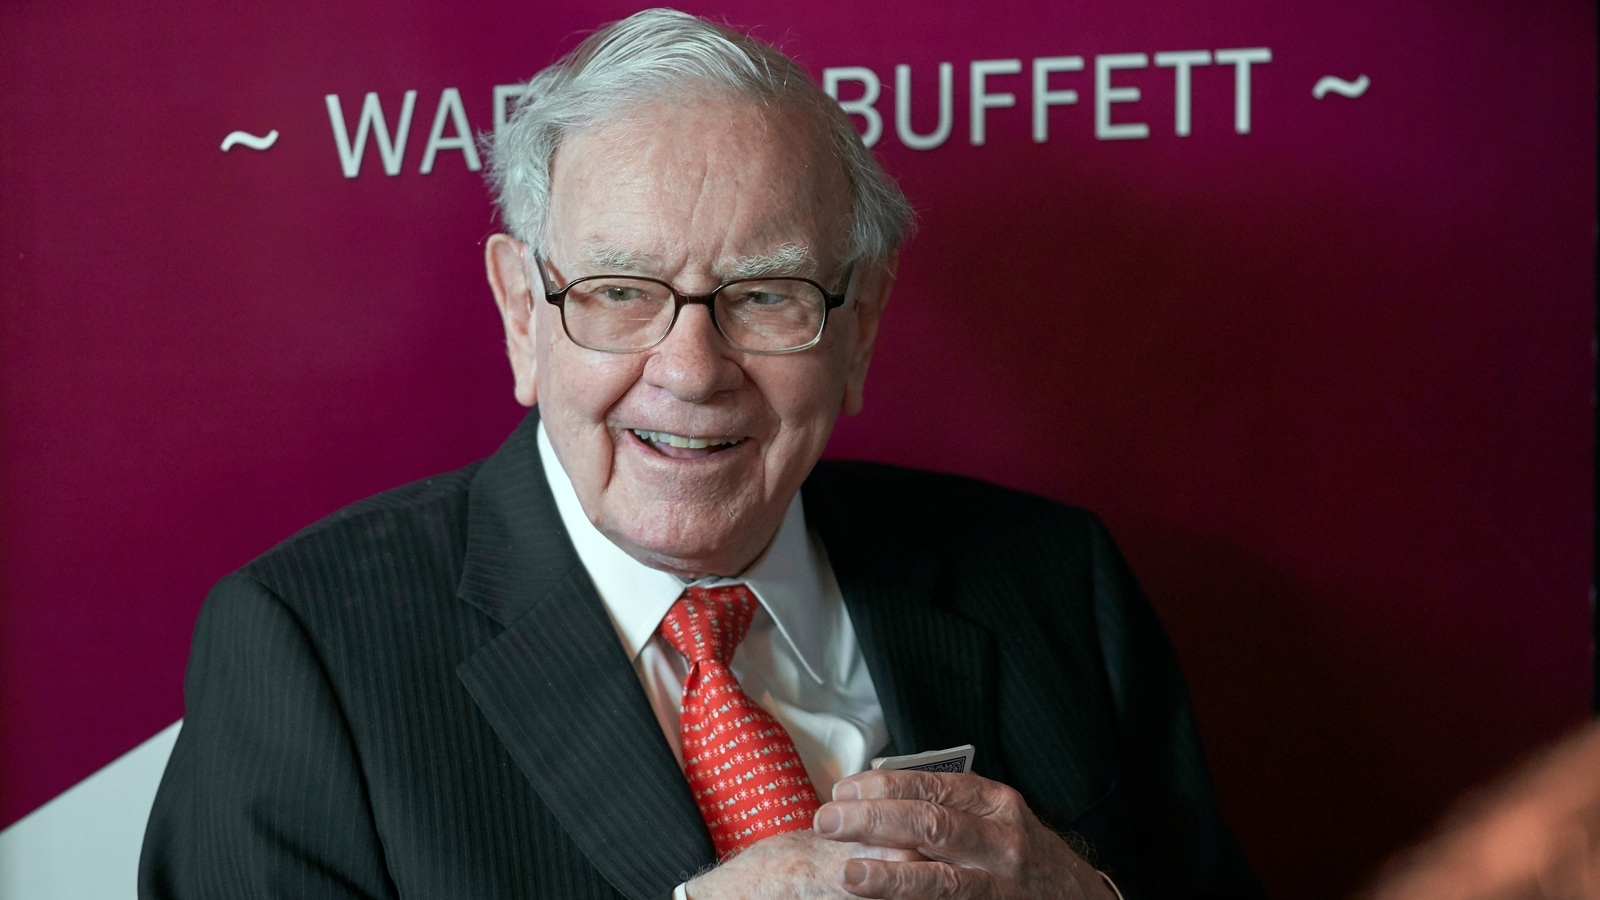 Mystery man (or woman) to spend $19 million for lunch date with Warren Buffett